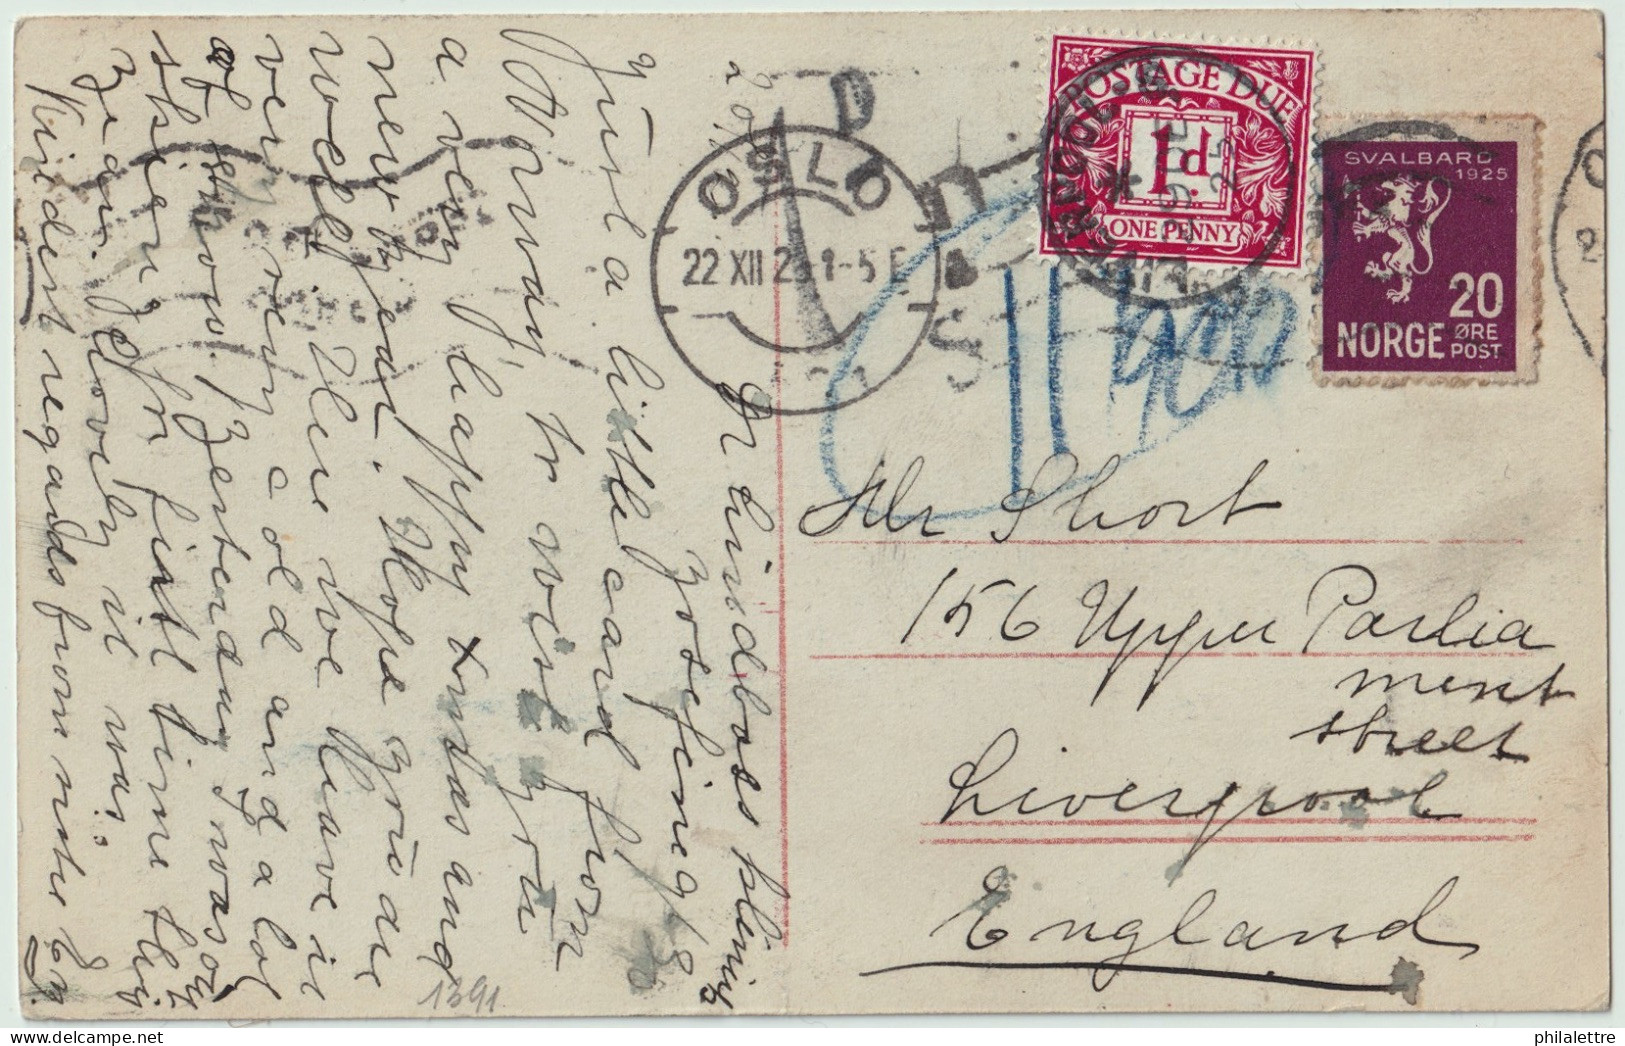 ROYAUME-UNI / UK - SG D11 On 1925 DENMARK To GB Underpaid Postage Due OSLO PPC To LIVERPOOL Franked 20 ör SVALBARD Issue - Strafportzegels